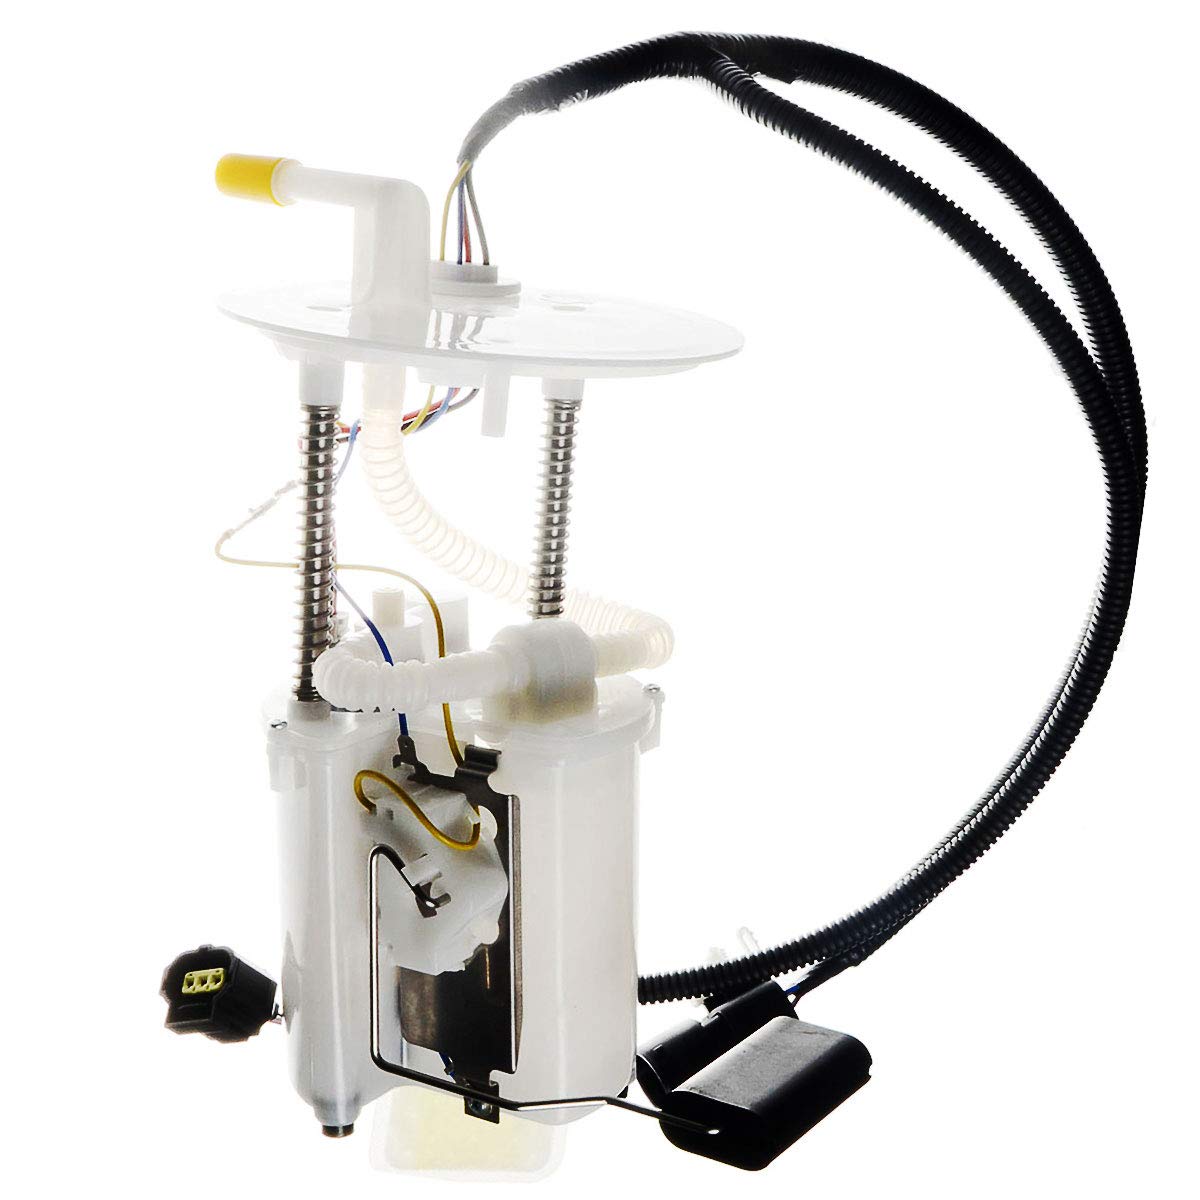 A-Premium Electric Fuel Pump Module Assembly with Sending Unit Replacement for Ford Taurus Mercury Sable 2000 V6 3.0L excluding Flex Engine